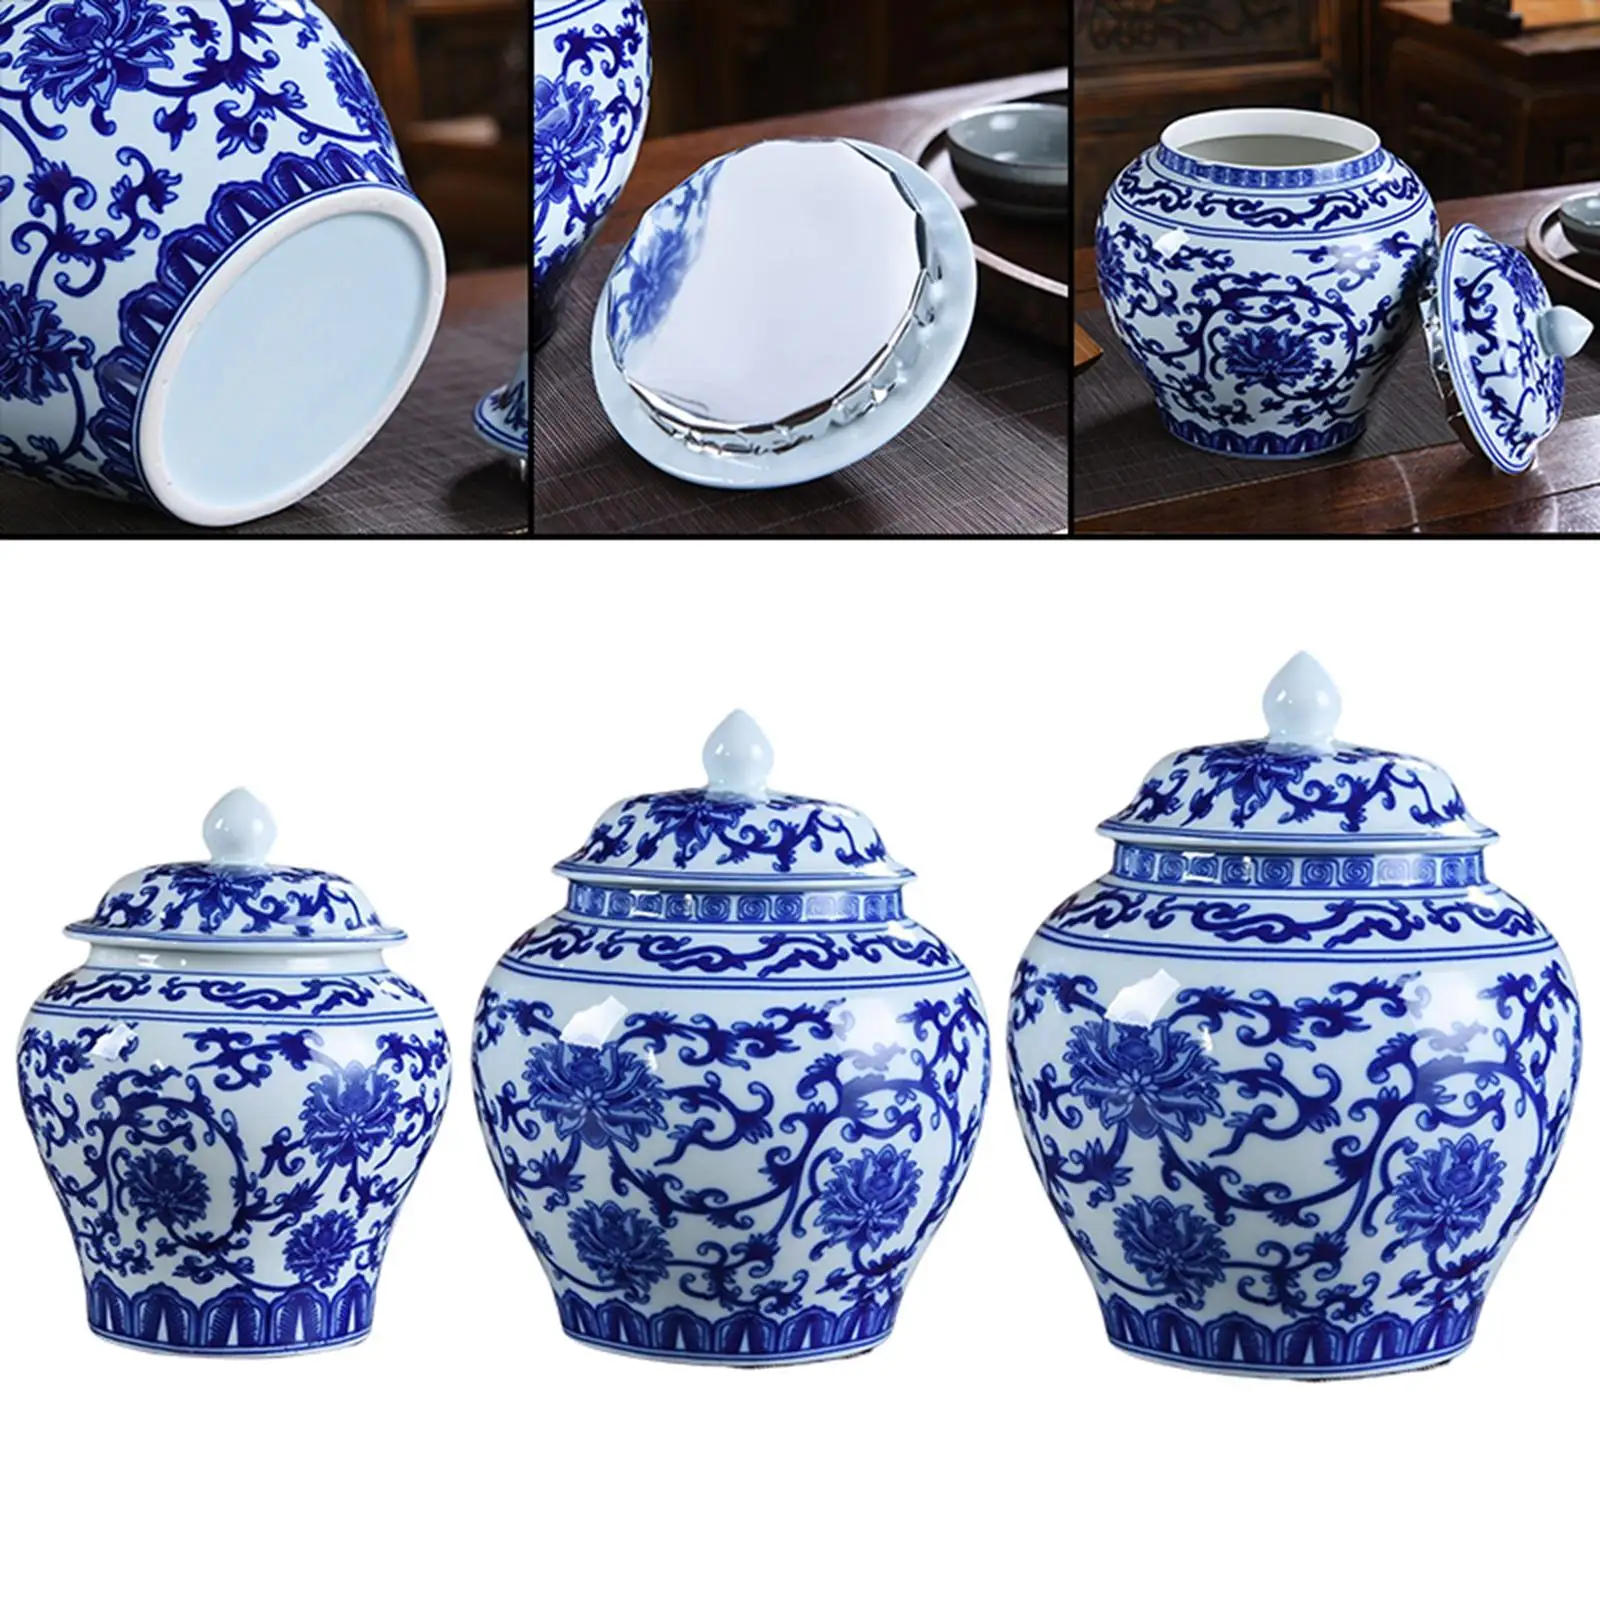 Plum Blossom Porcelain Tea Storage Jar with Lid Beautiful for Home Dining